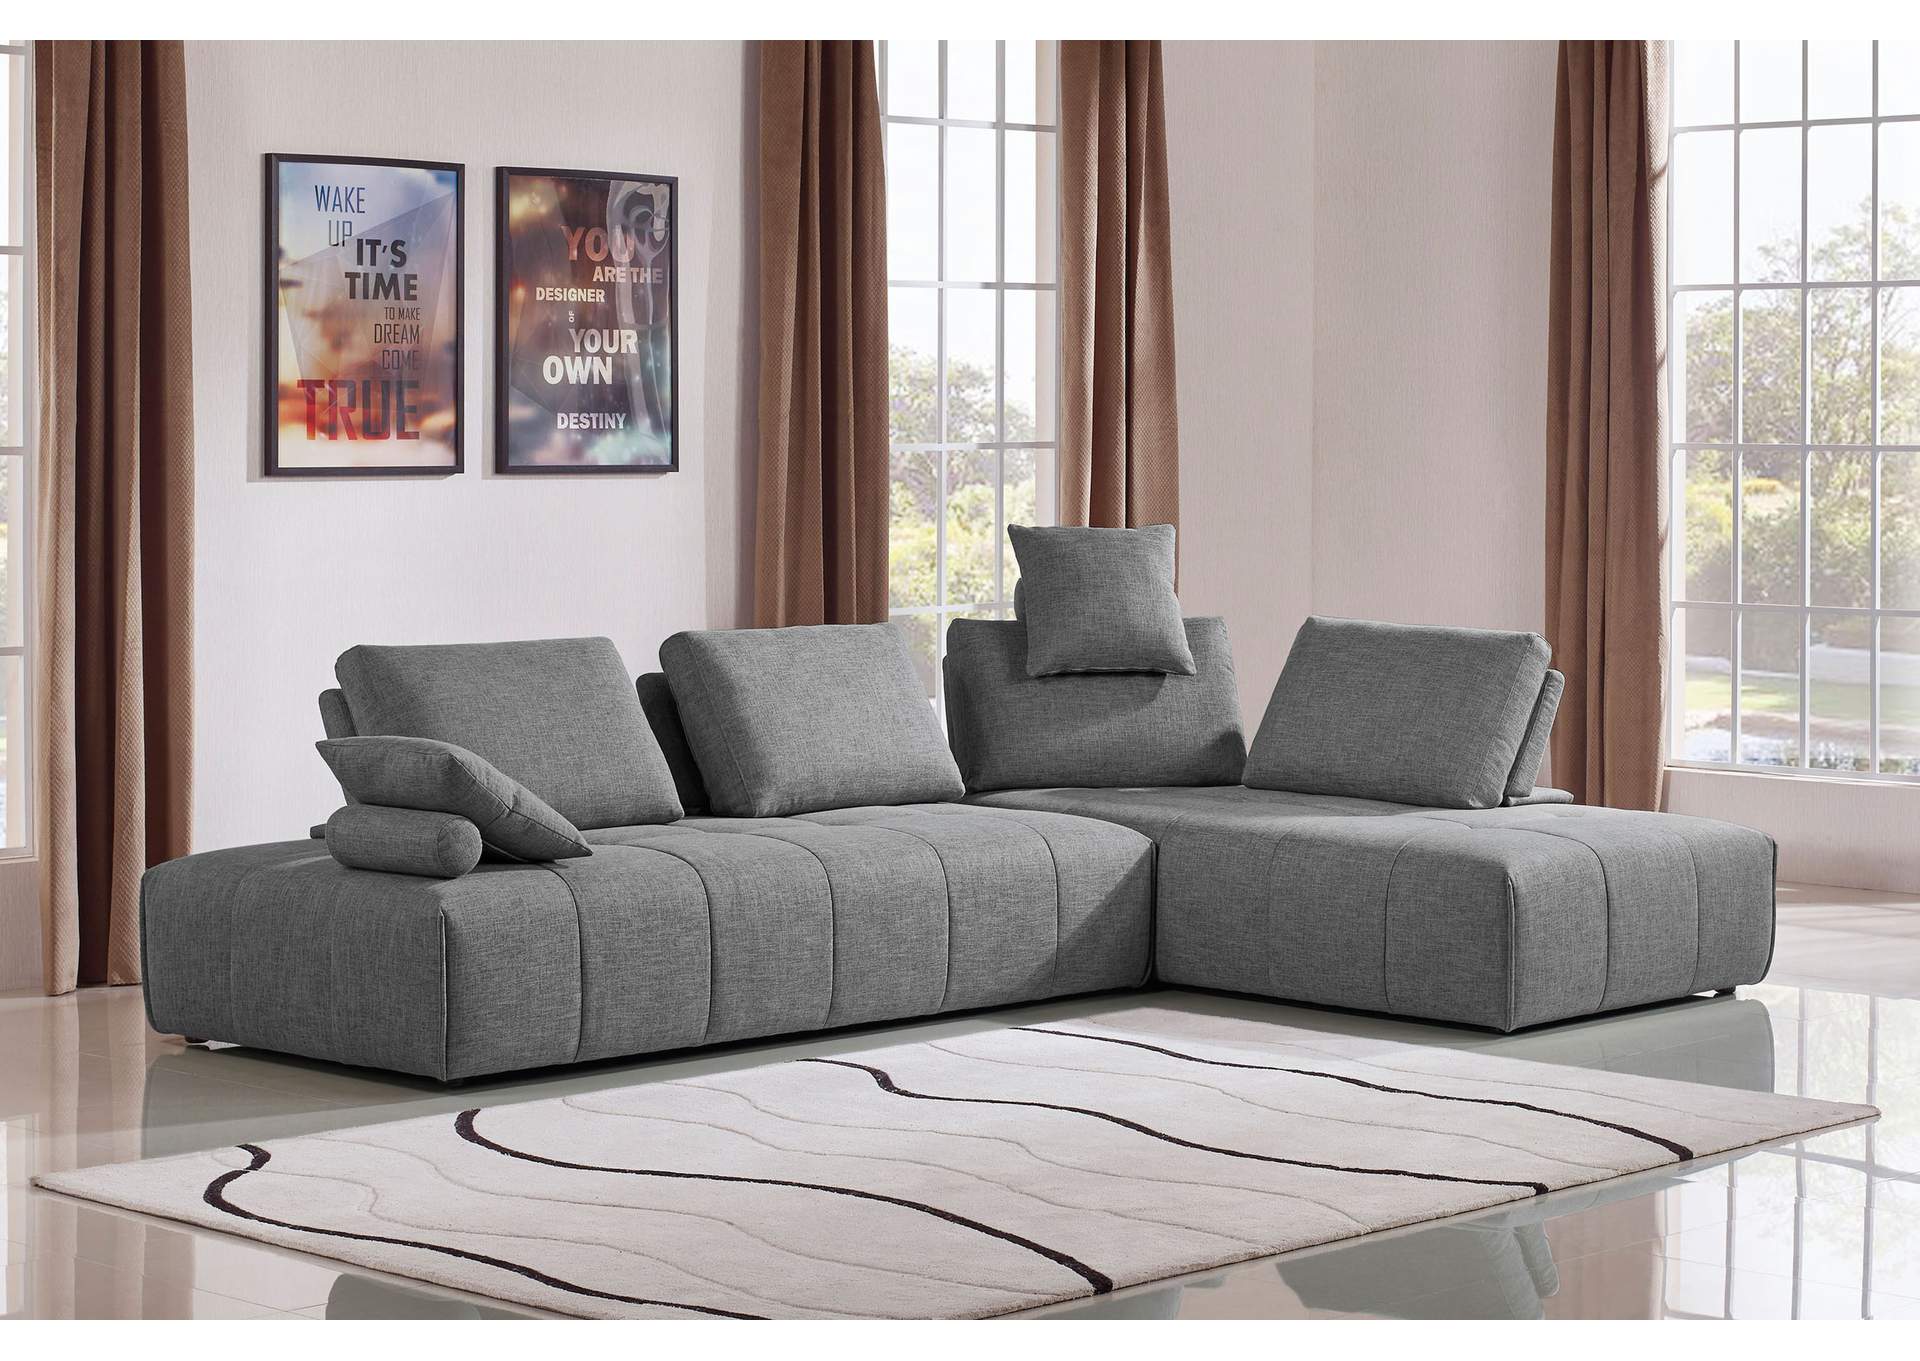 Cloud 2PC Lounge Seating Platforms with Moveable Backrest Supports in Space Grey Fabric by Diamond Sofa,Diamond Sofa